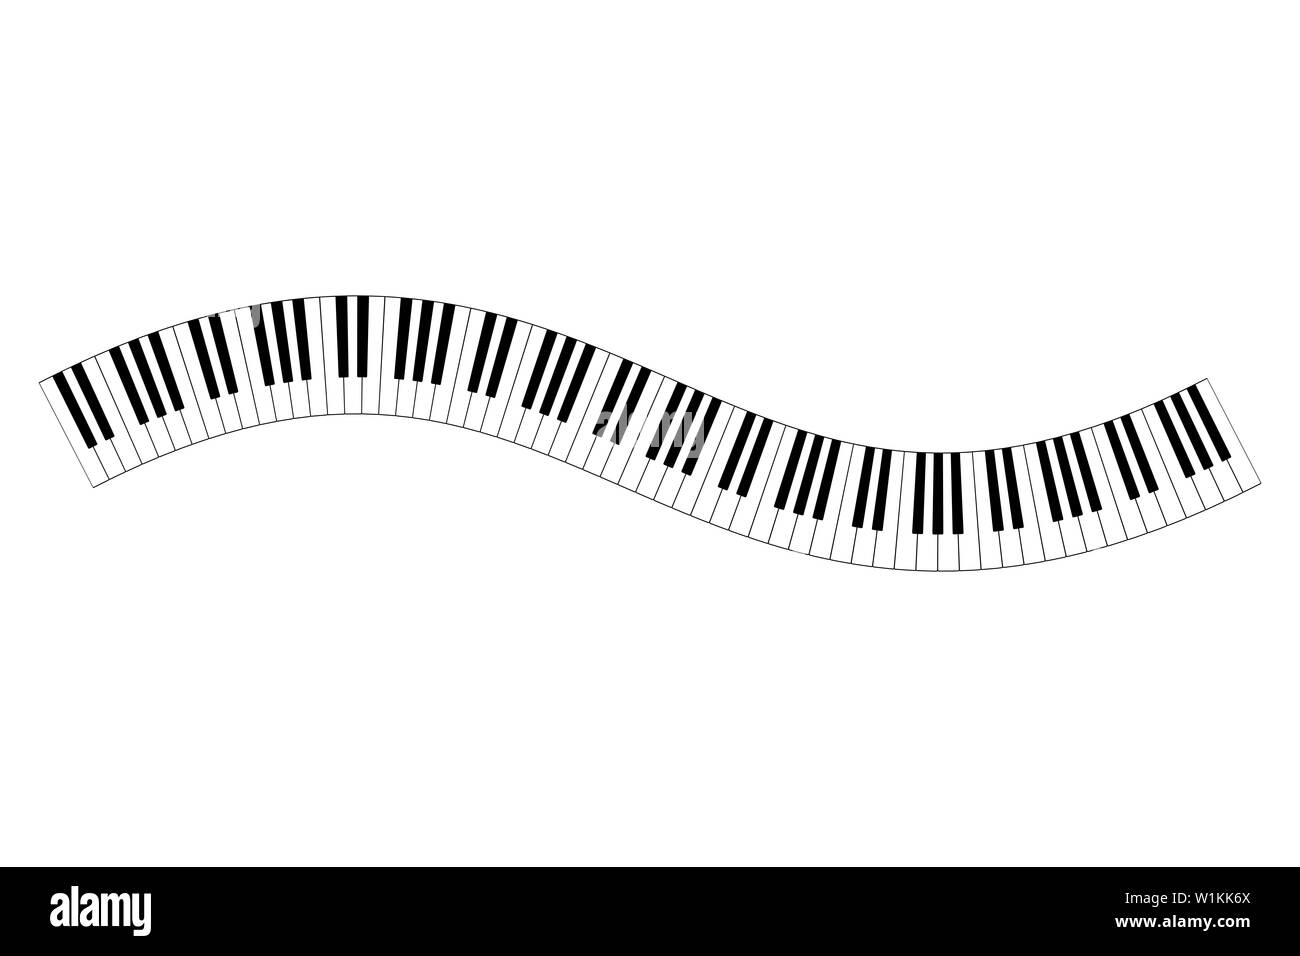 Musical keyboard wave, constructed from octave patterns, black and white piano keyboard keys, shaped into repeated motif. Illustration. Stock Photo